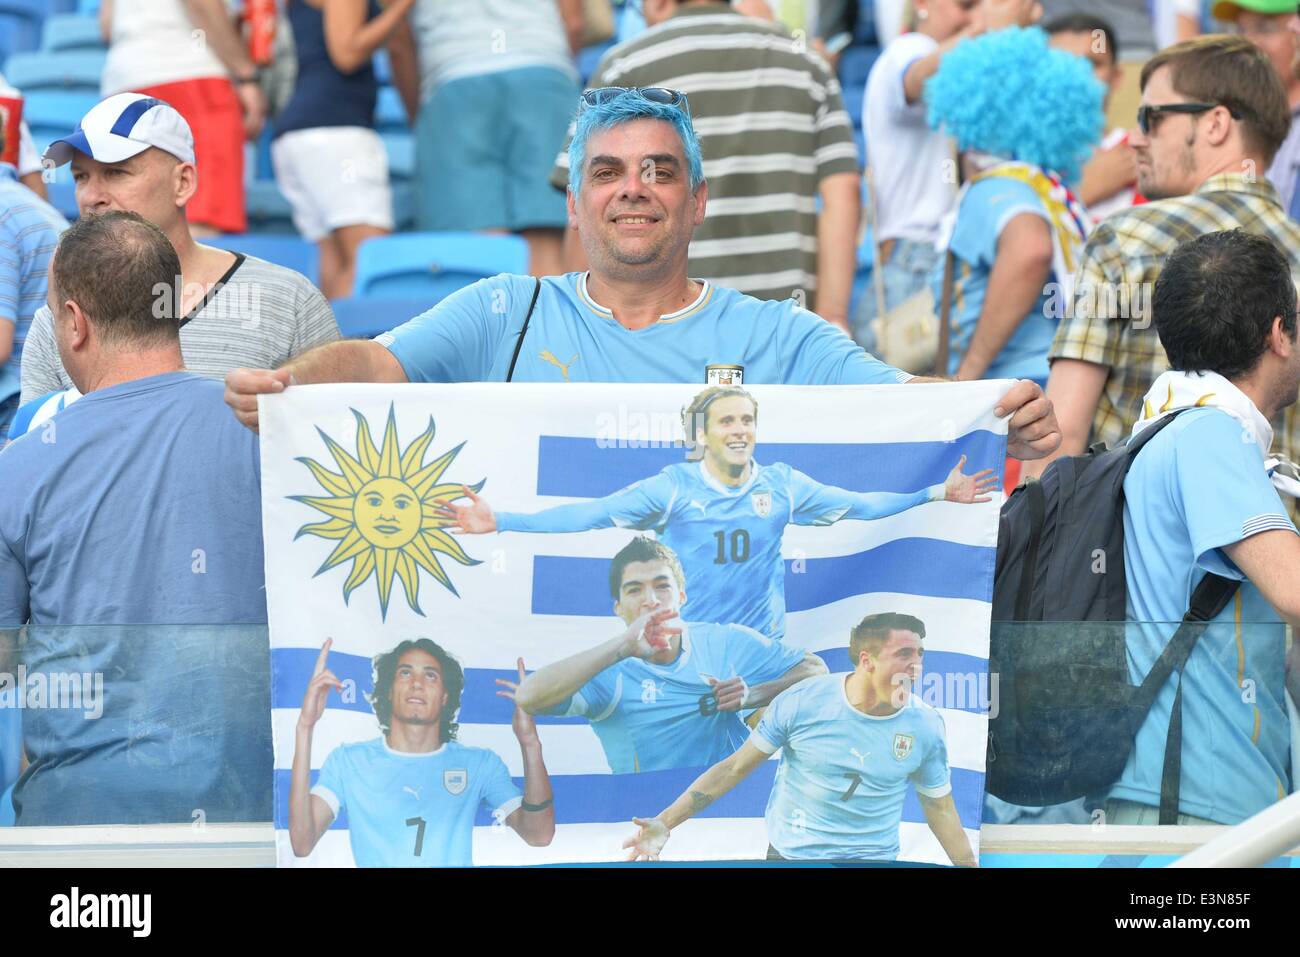 Natal, Brazil. 24th June, 2014. An Uruguay's fan celebrates the victory after a Group D match between Italy and Uruguay of 2014 FIFA World Cup at the Estadio das Dunas Stadium in Natal, Brazil, June 24, 2014. Uruguay won 1-0 over Italy on Tuesday. © Guo Yong/Xinhua/Alamy Live News Stock Photo